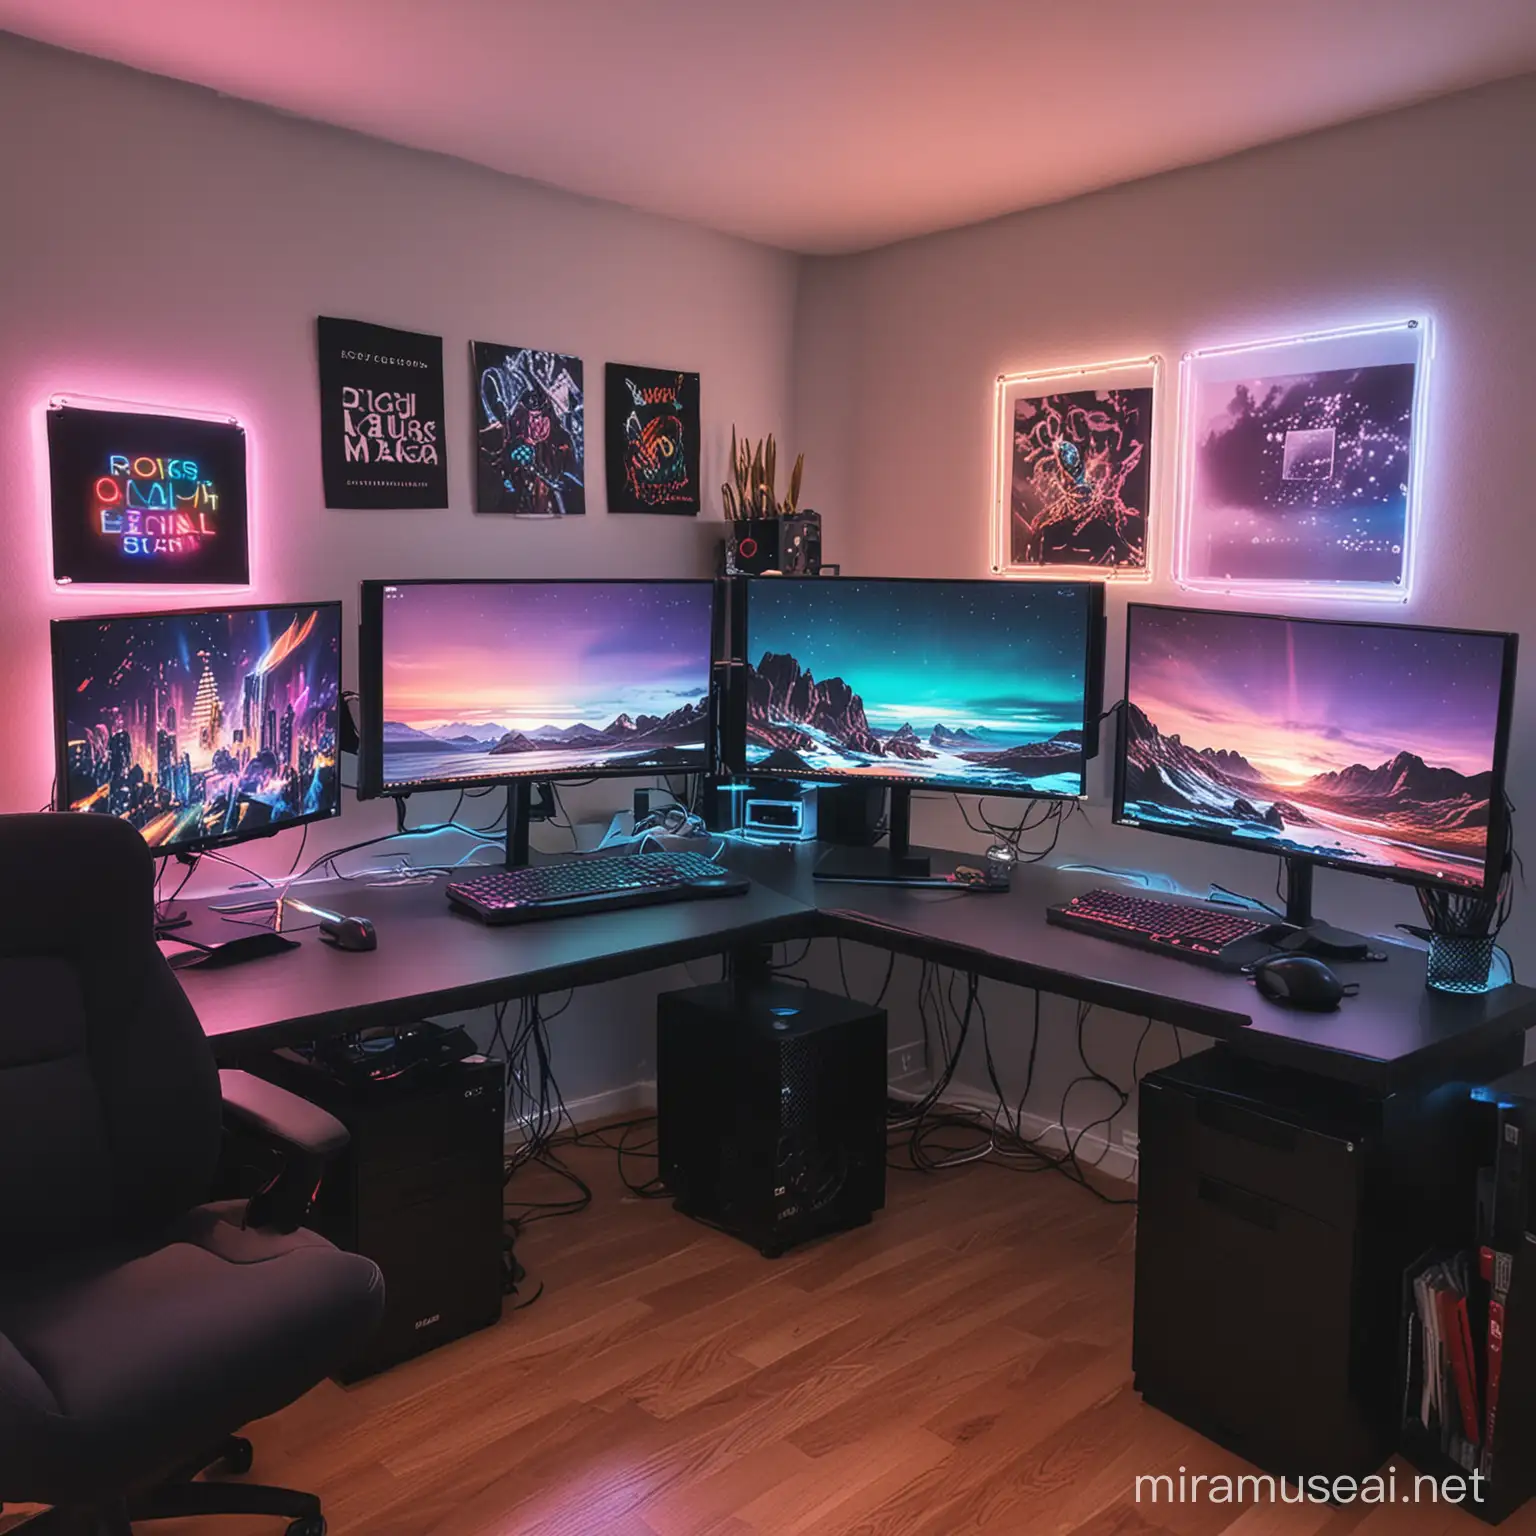 Modern HighEnd Computer Setup with RGB Lighting in Aesthetically Designed Room